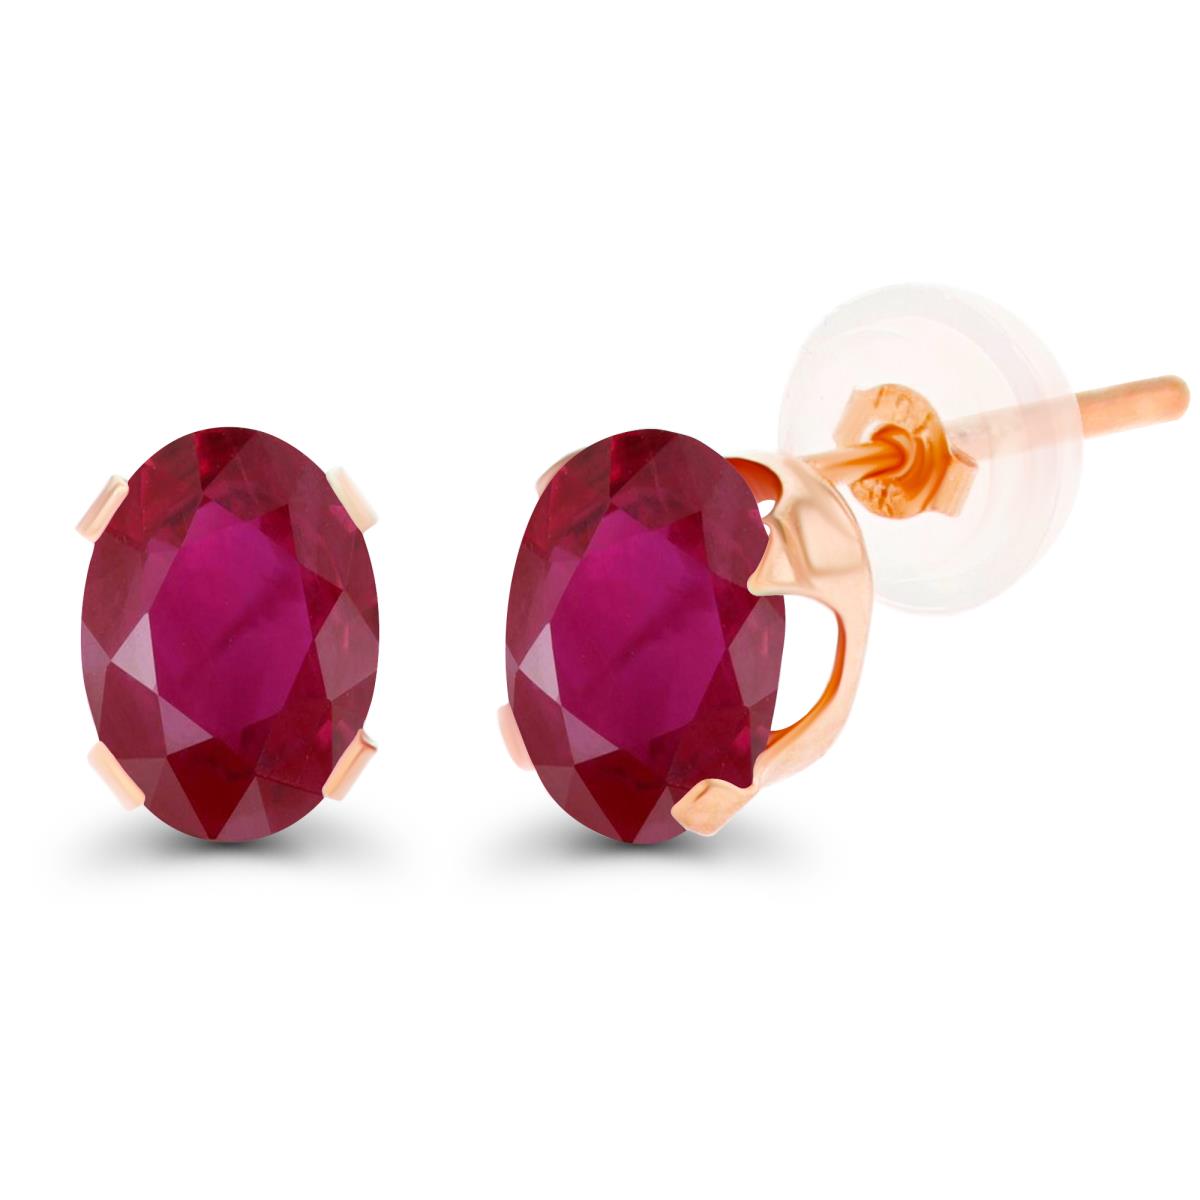 10K Rose Gold 7x5mm Oval Glass Filled Ruby Stud Earring with Silicone Back